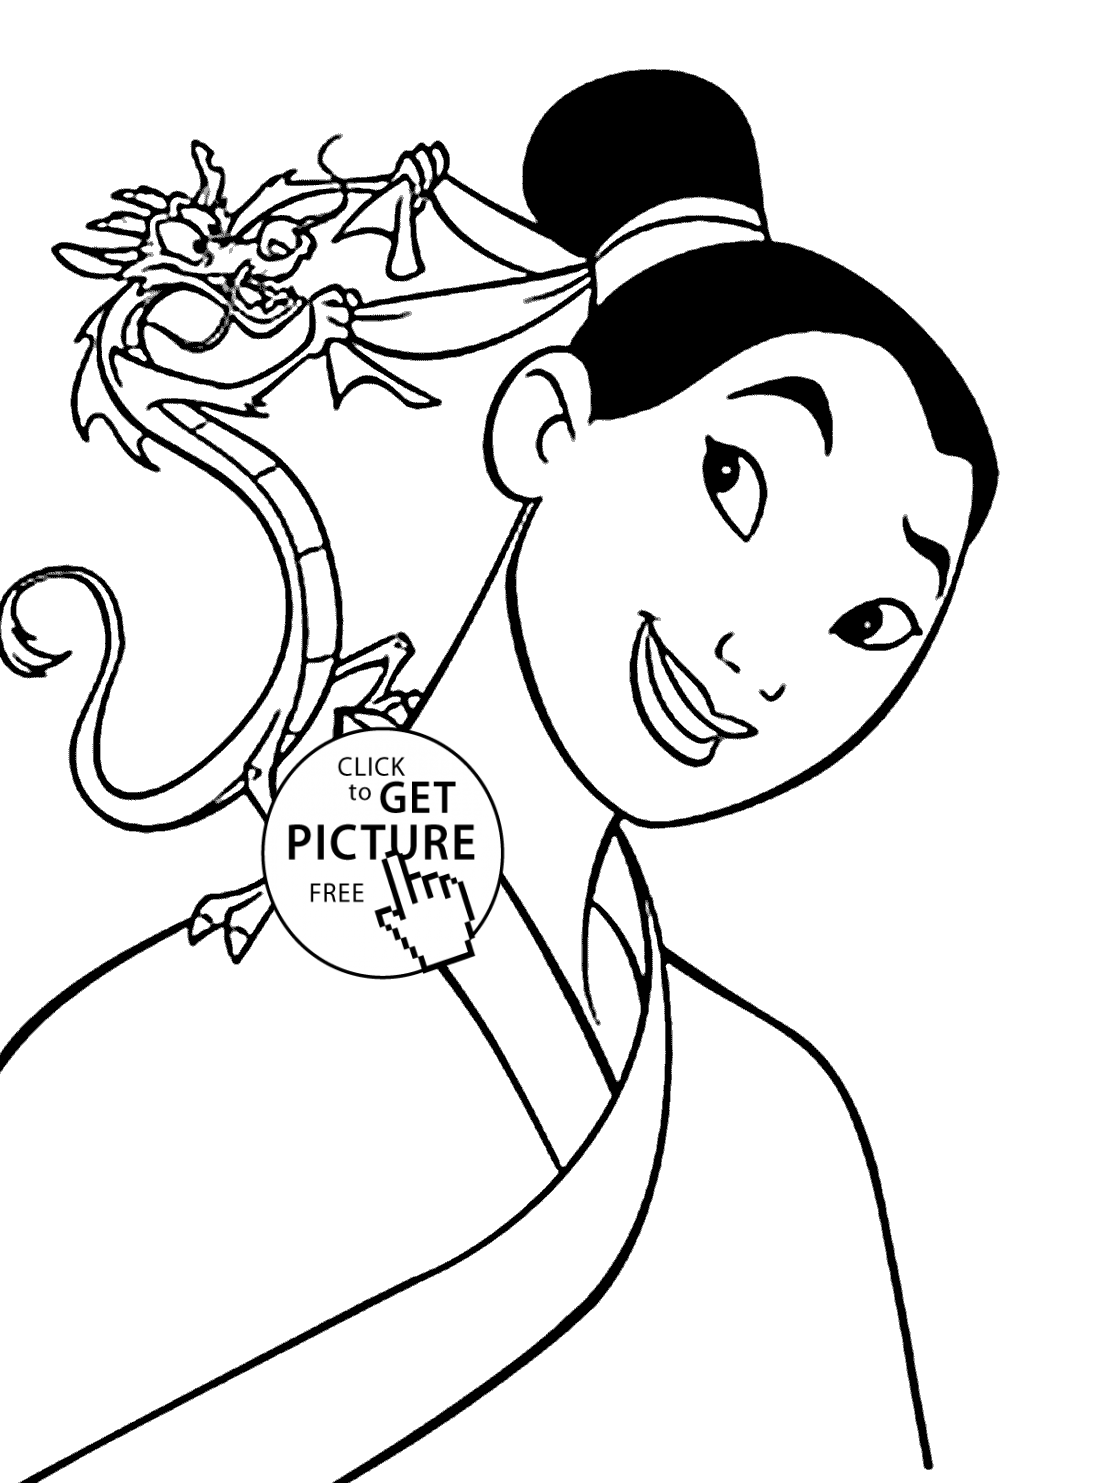 Mulan coloring pages for kids, printable free